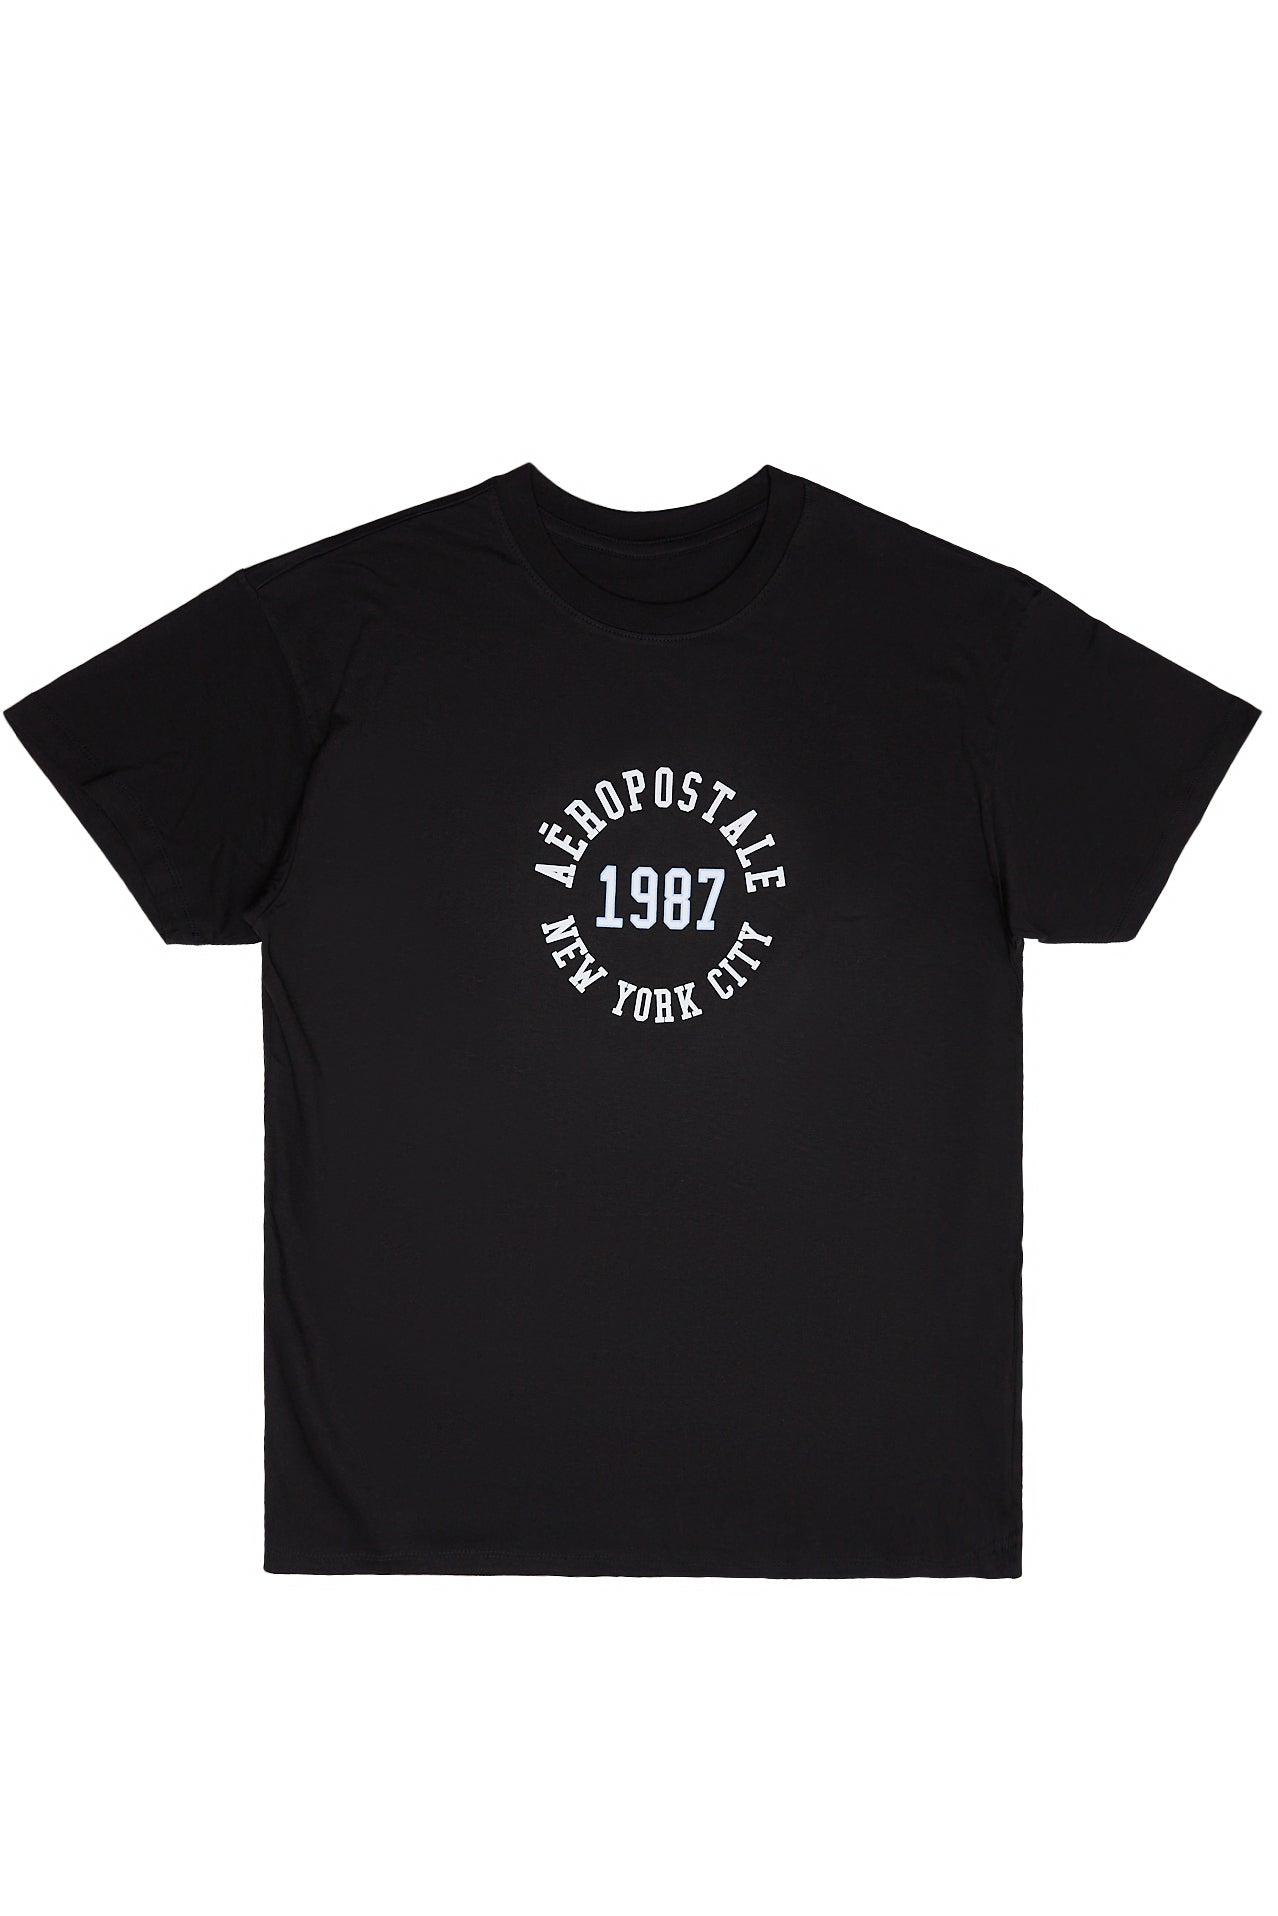 Aéropostale 1987 New York City Graphic Relaxed Tee